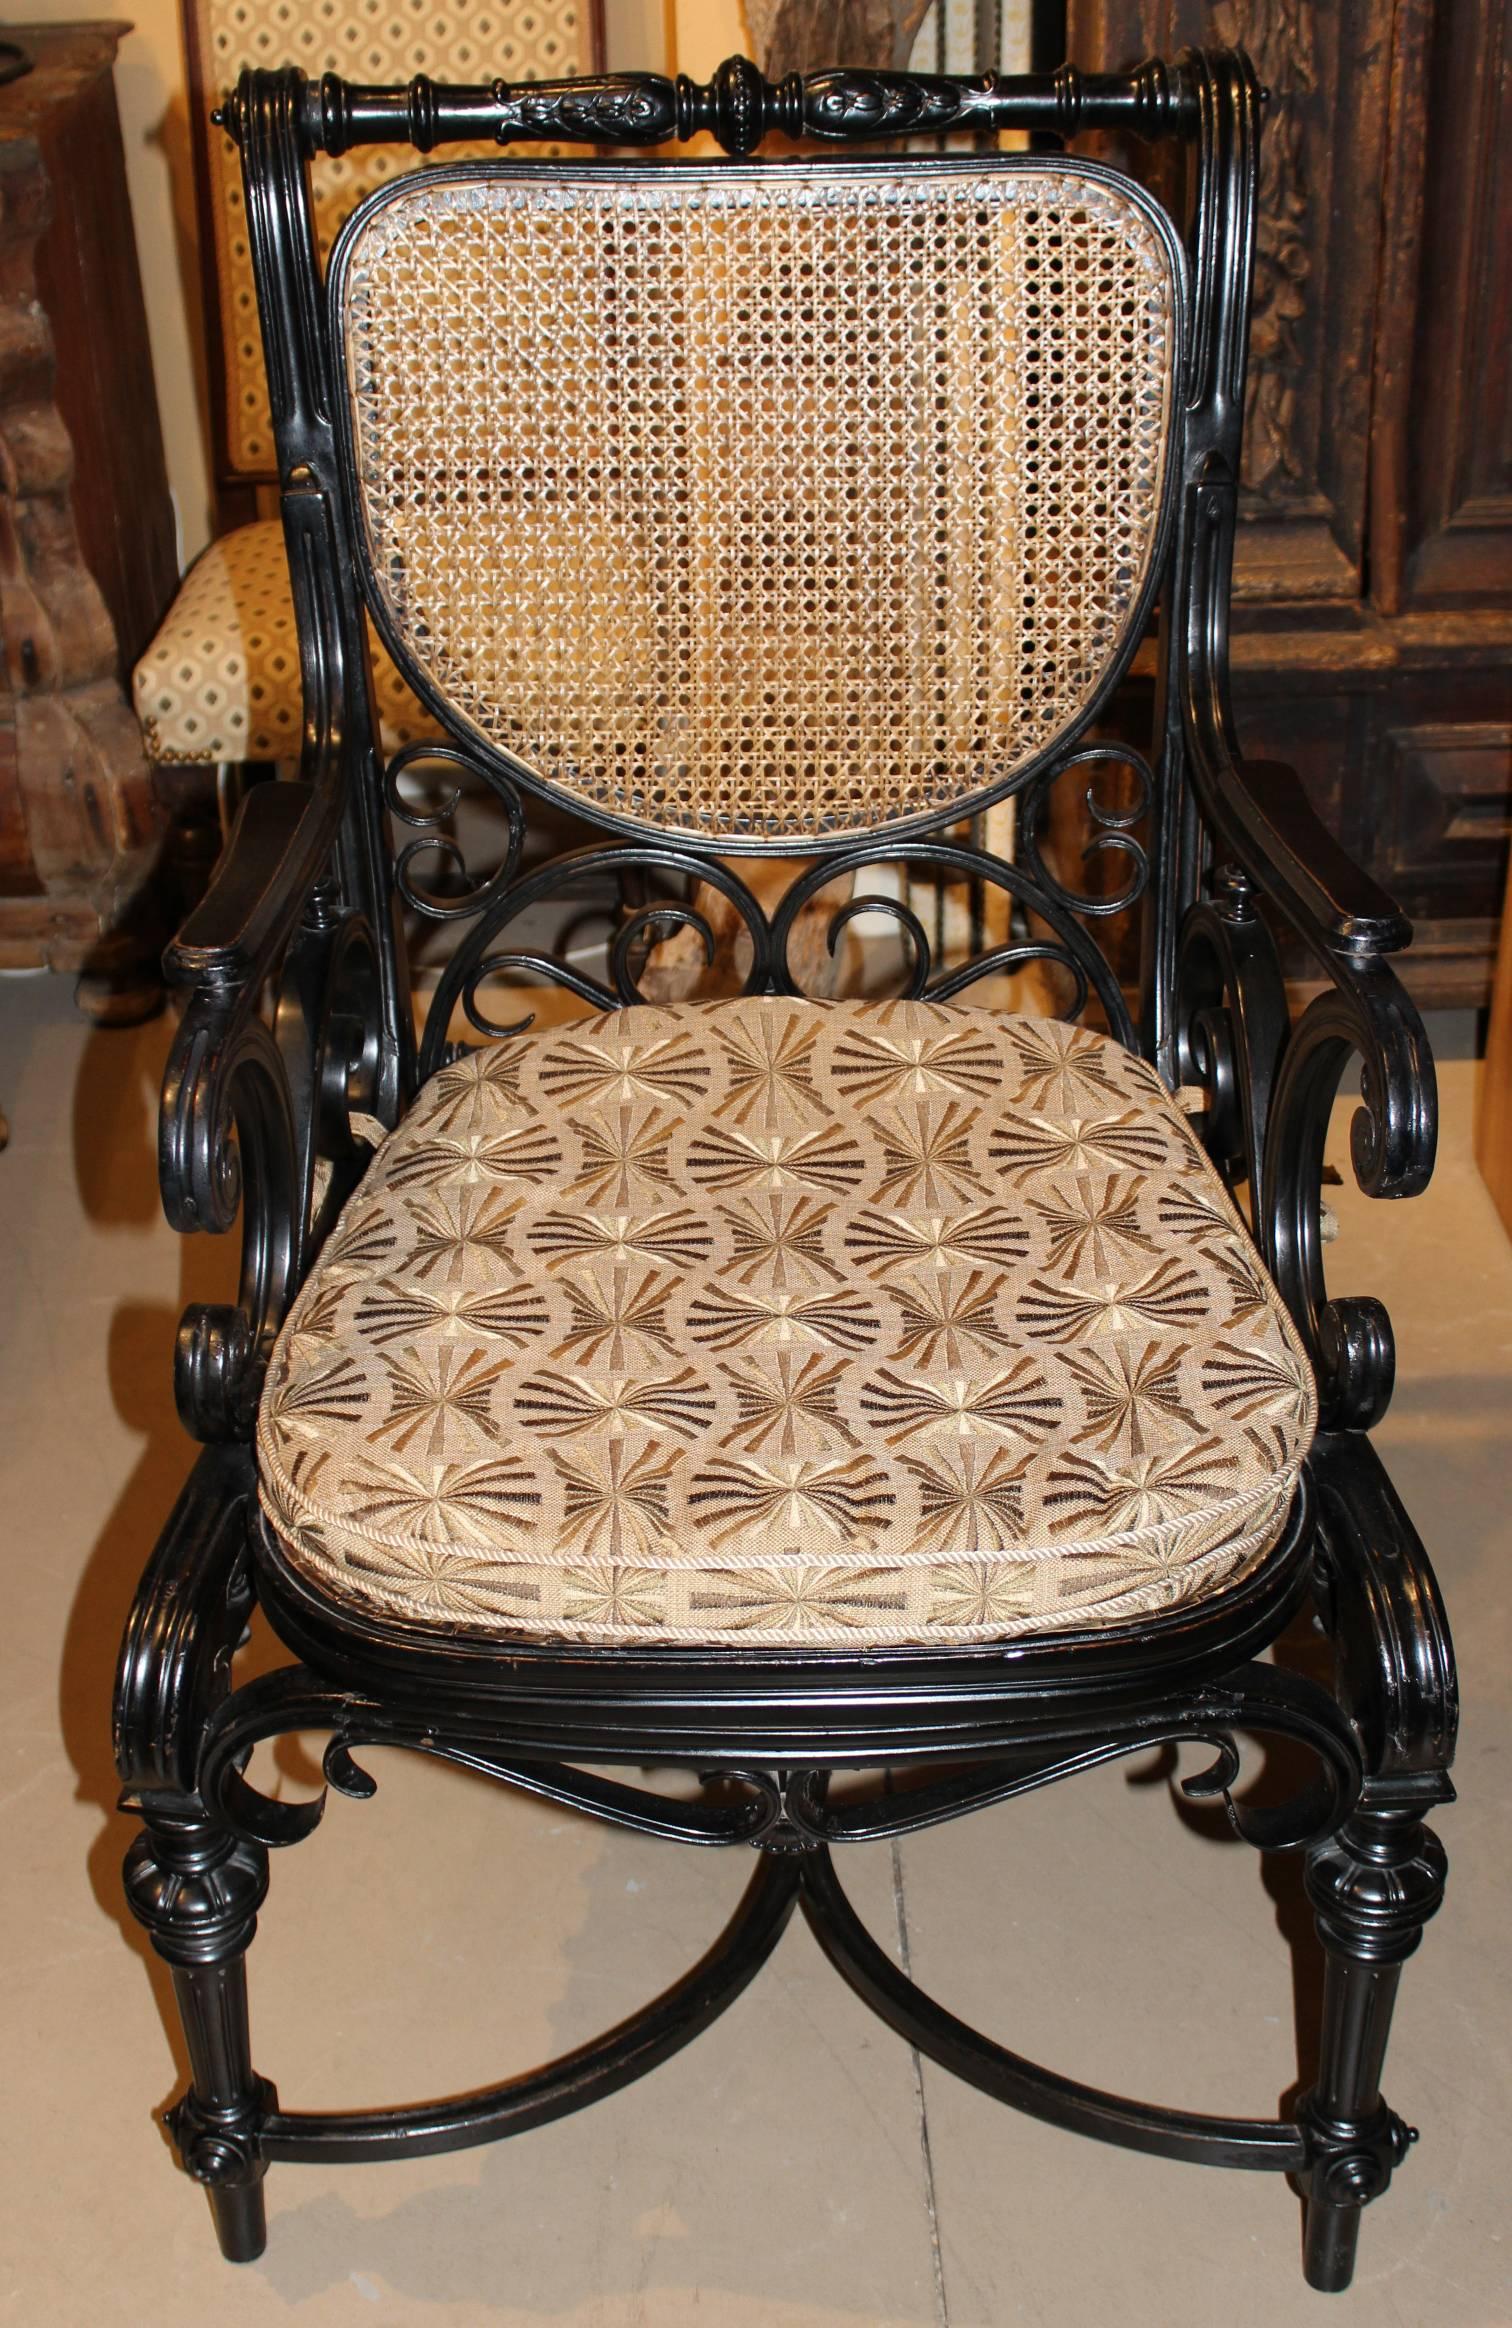 A well crafted Aesthetic ebonized bentwood armchair of pleasing proportion with caned seat and back, scroll carved decoration, turned crest rail, and demilune bentwood stretchers. A freshly upholstered cushion has been added to accent the piece.